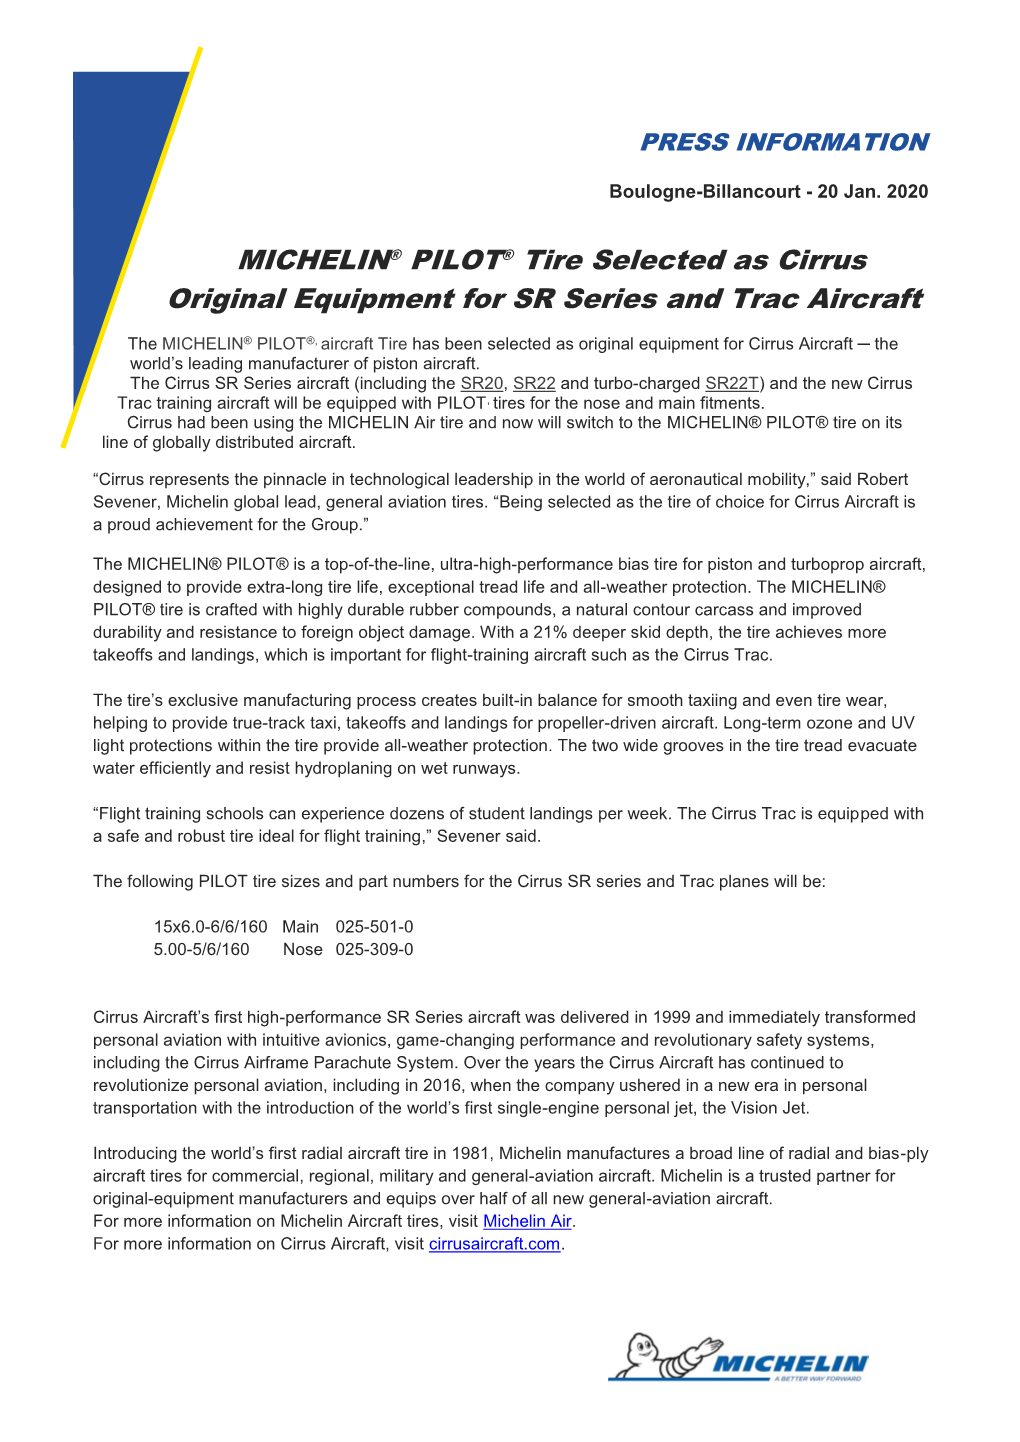 MICHELIN® PILOT® Tire Selected As Cirrus Original Equipment for SR Series and Trac Aircraft